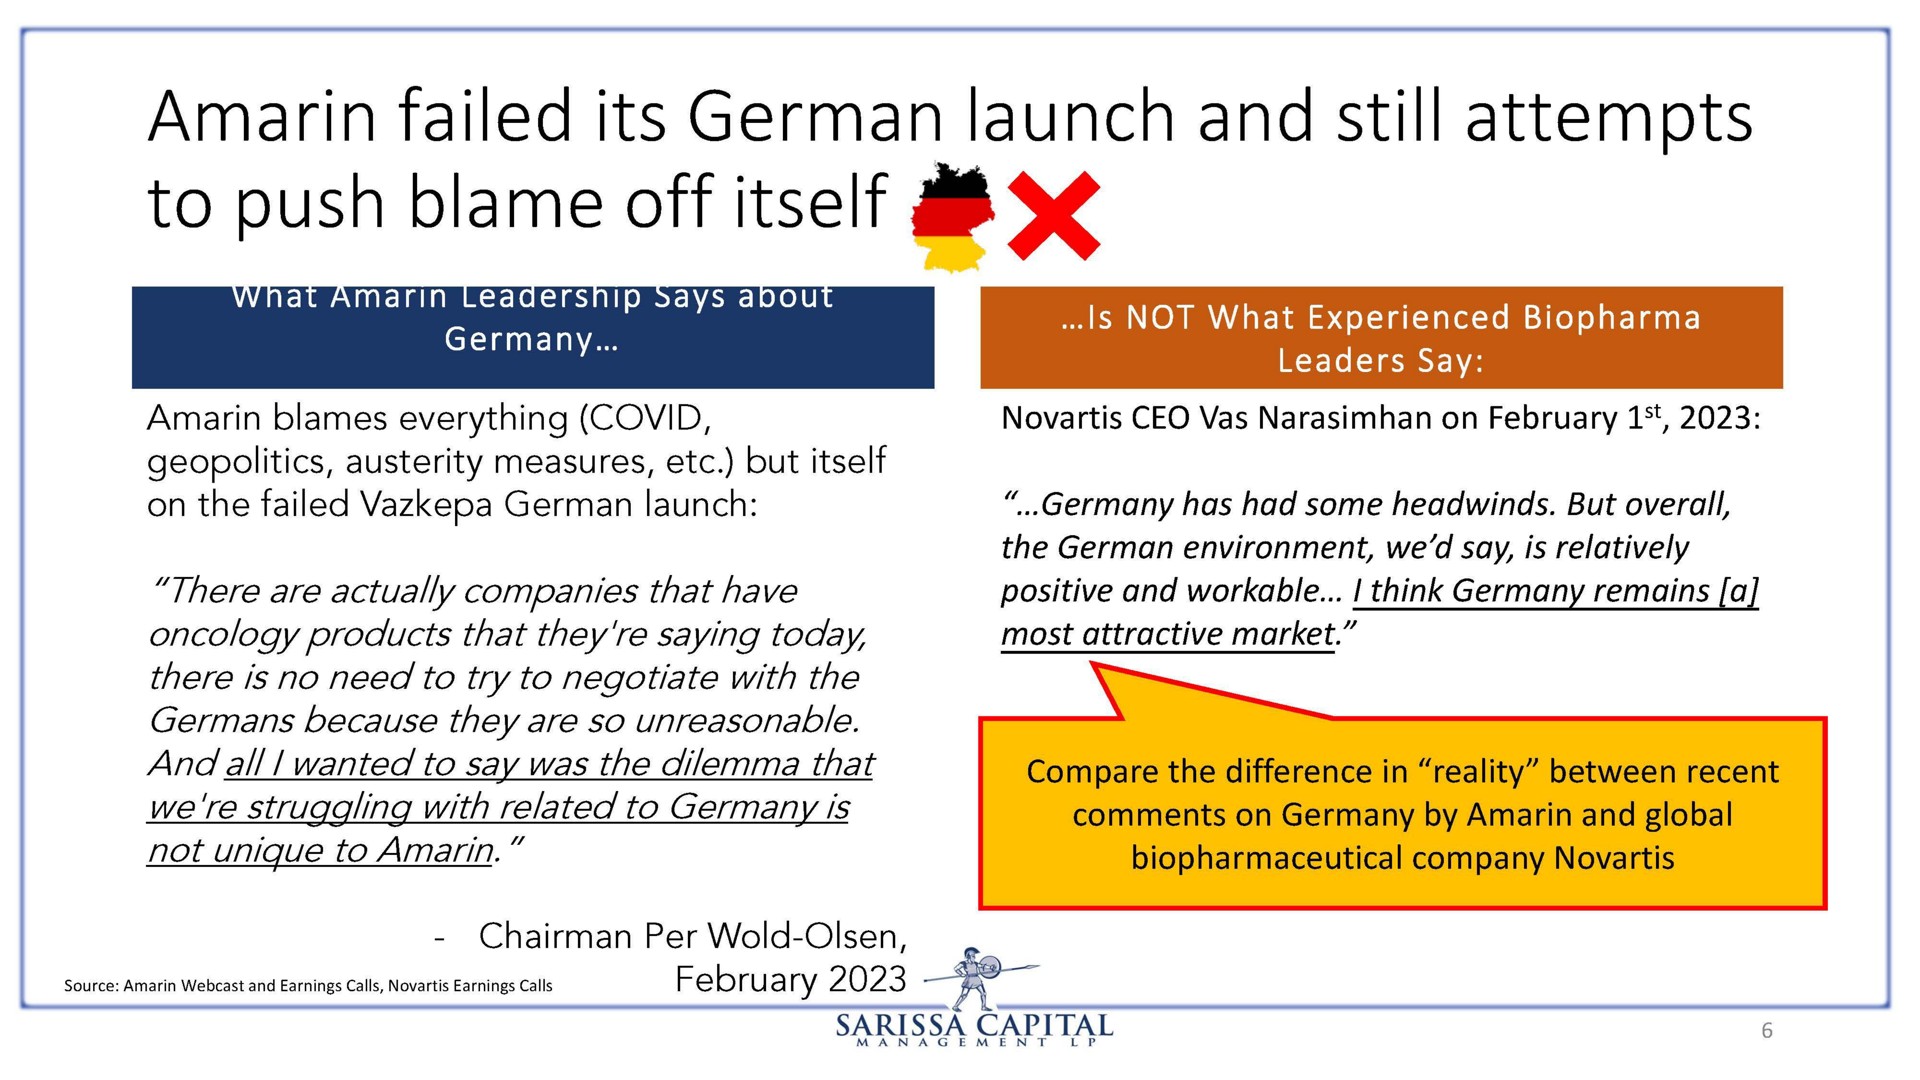 amarin failed its german launch and still attempts to push blame off itself | Sarissa Capital